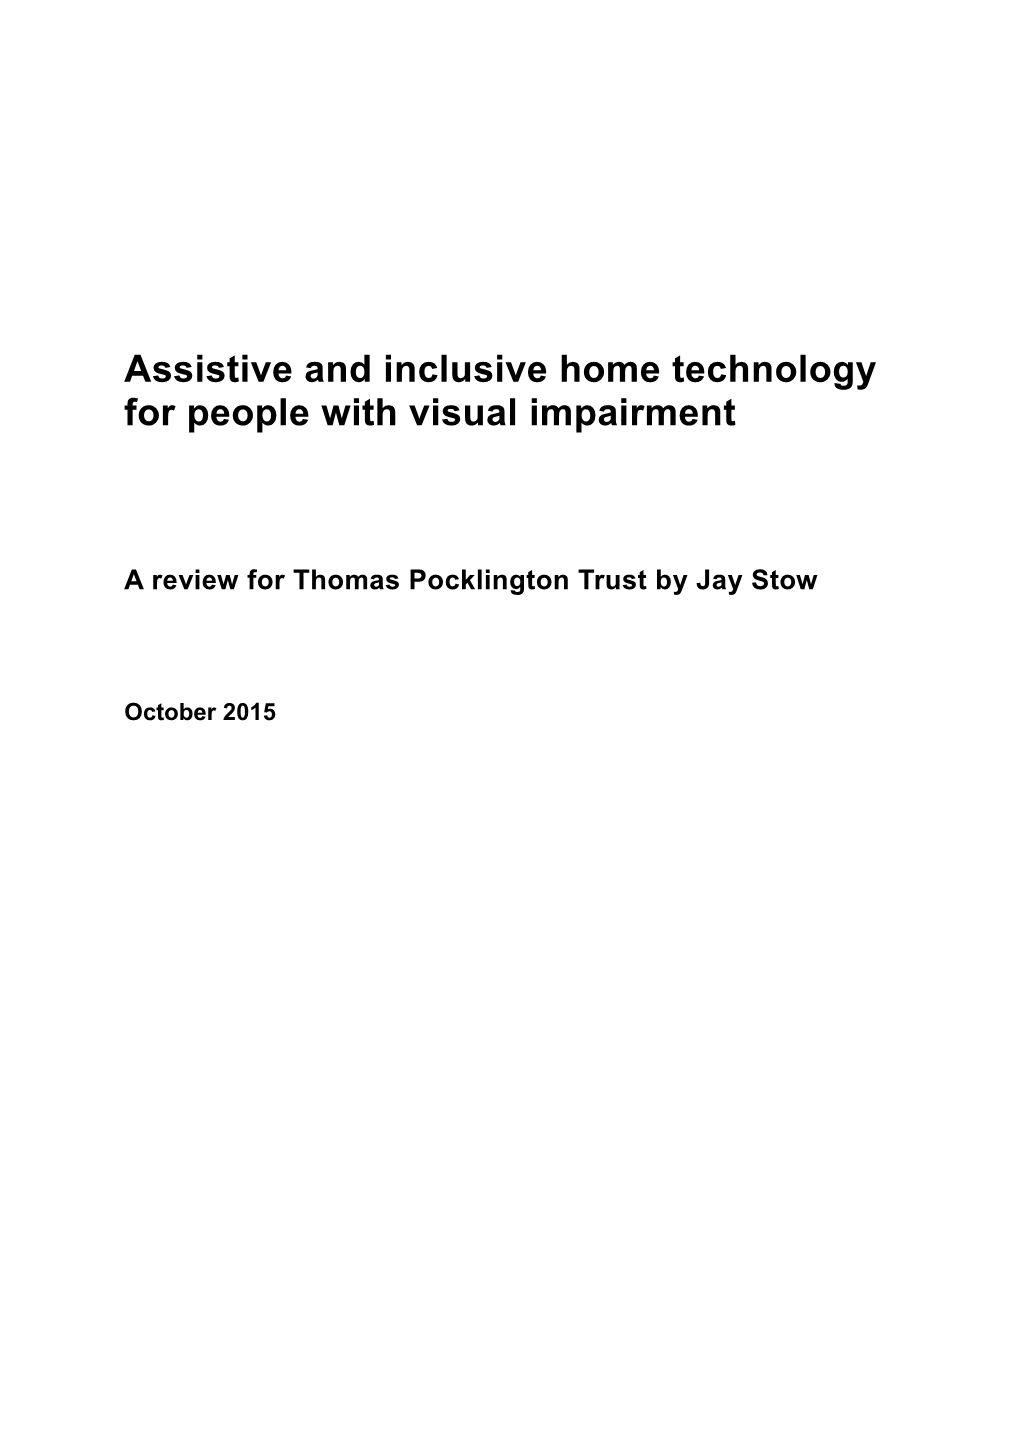 Assistive and Inclusive Home Technology: Developments and Trends with Reference to People